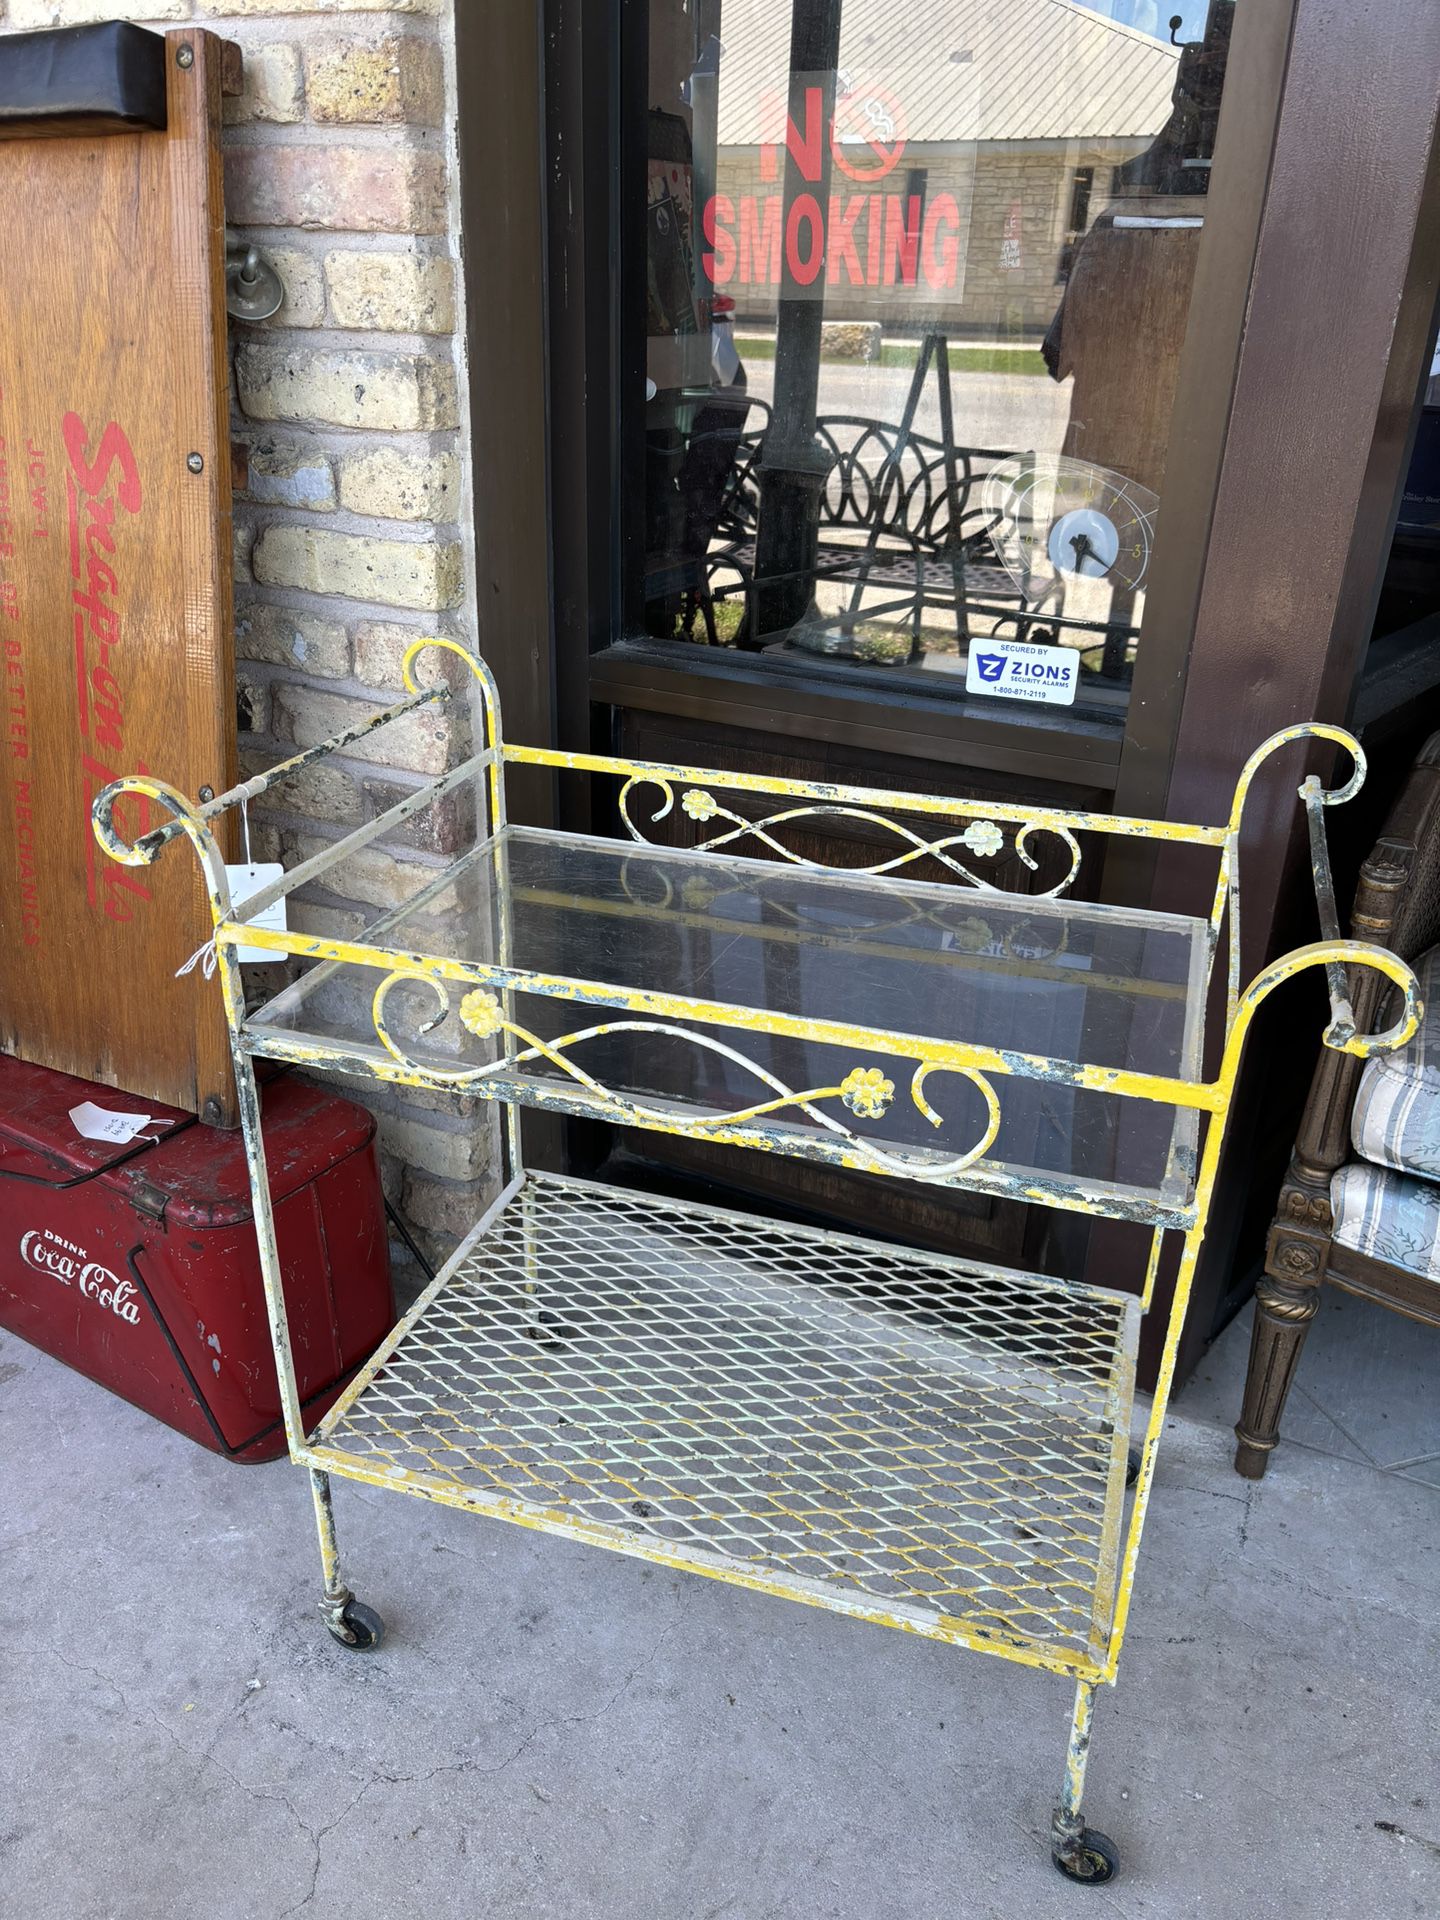 31x16x30 vintage metal shabby cart. 125.00.  Johanna at Antiques and More. Located at 316b Main Street Buda. Antiques vintage retro furniture collecti